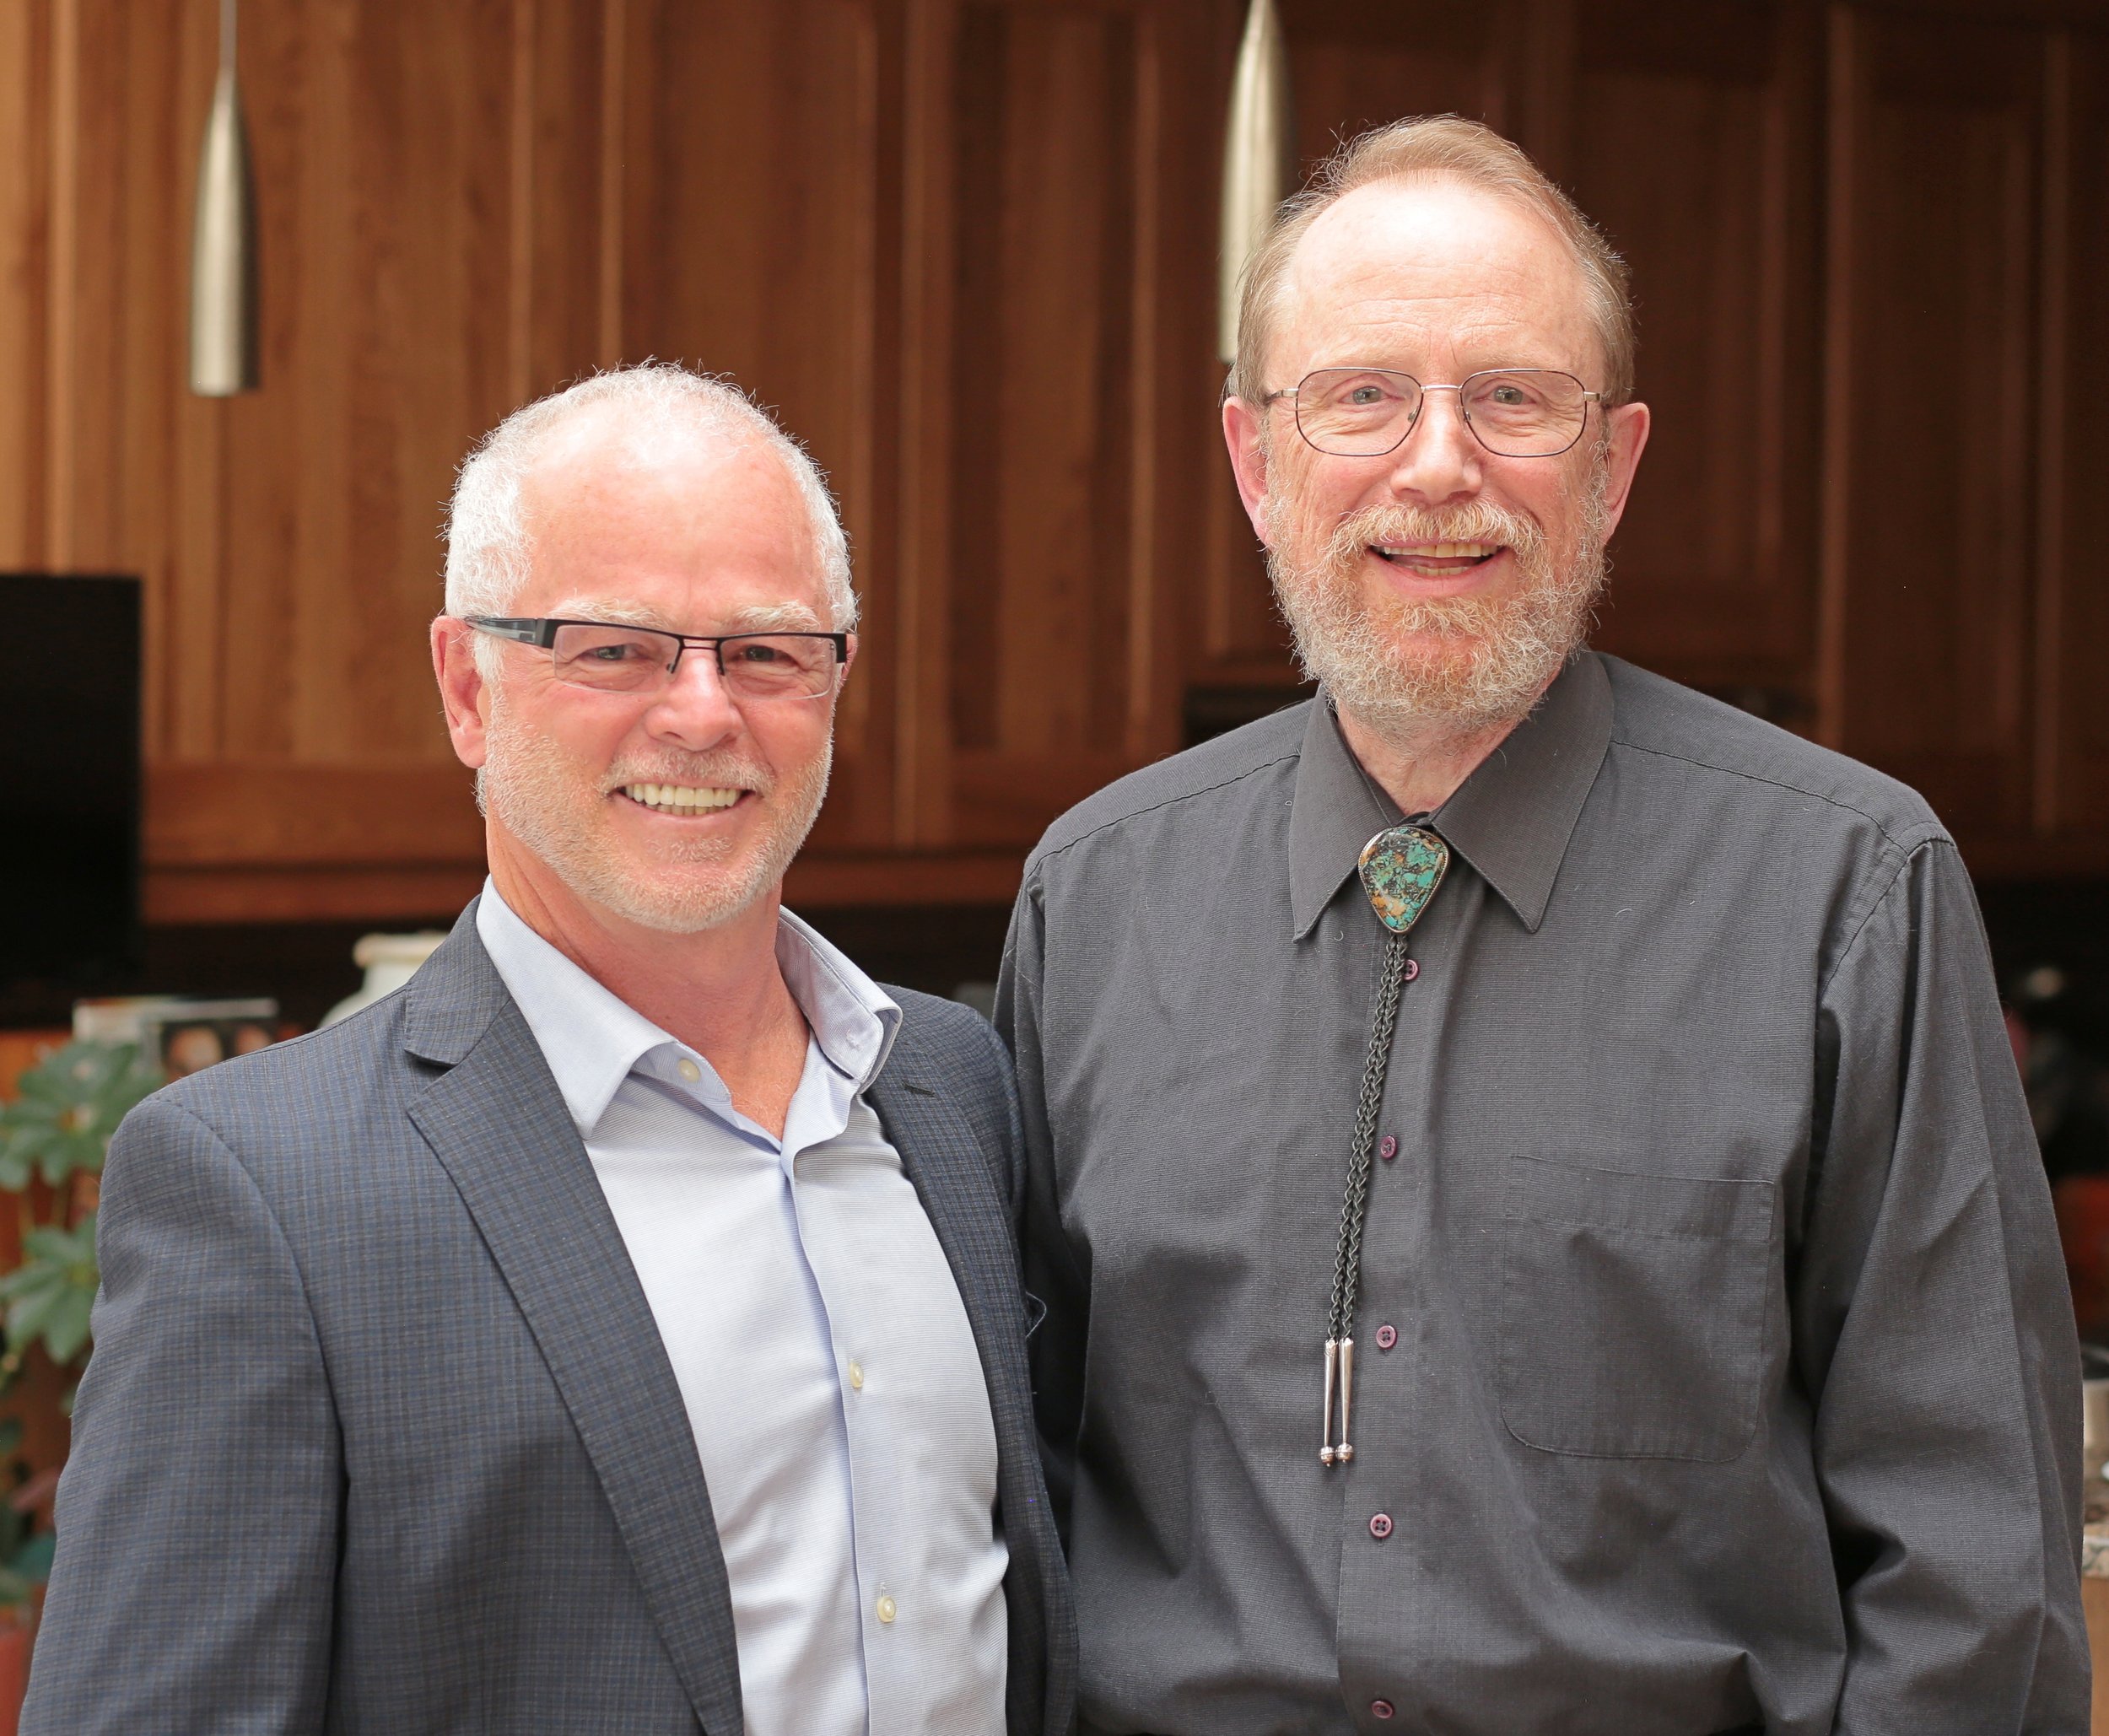 9-Mike Pond with Dr. Bill Miller in Albuquerque, New Mexico.jpg